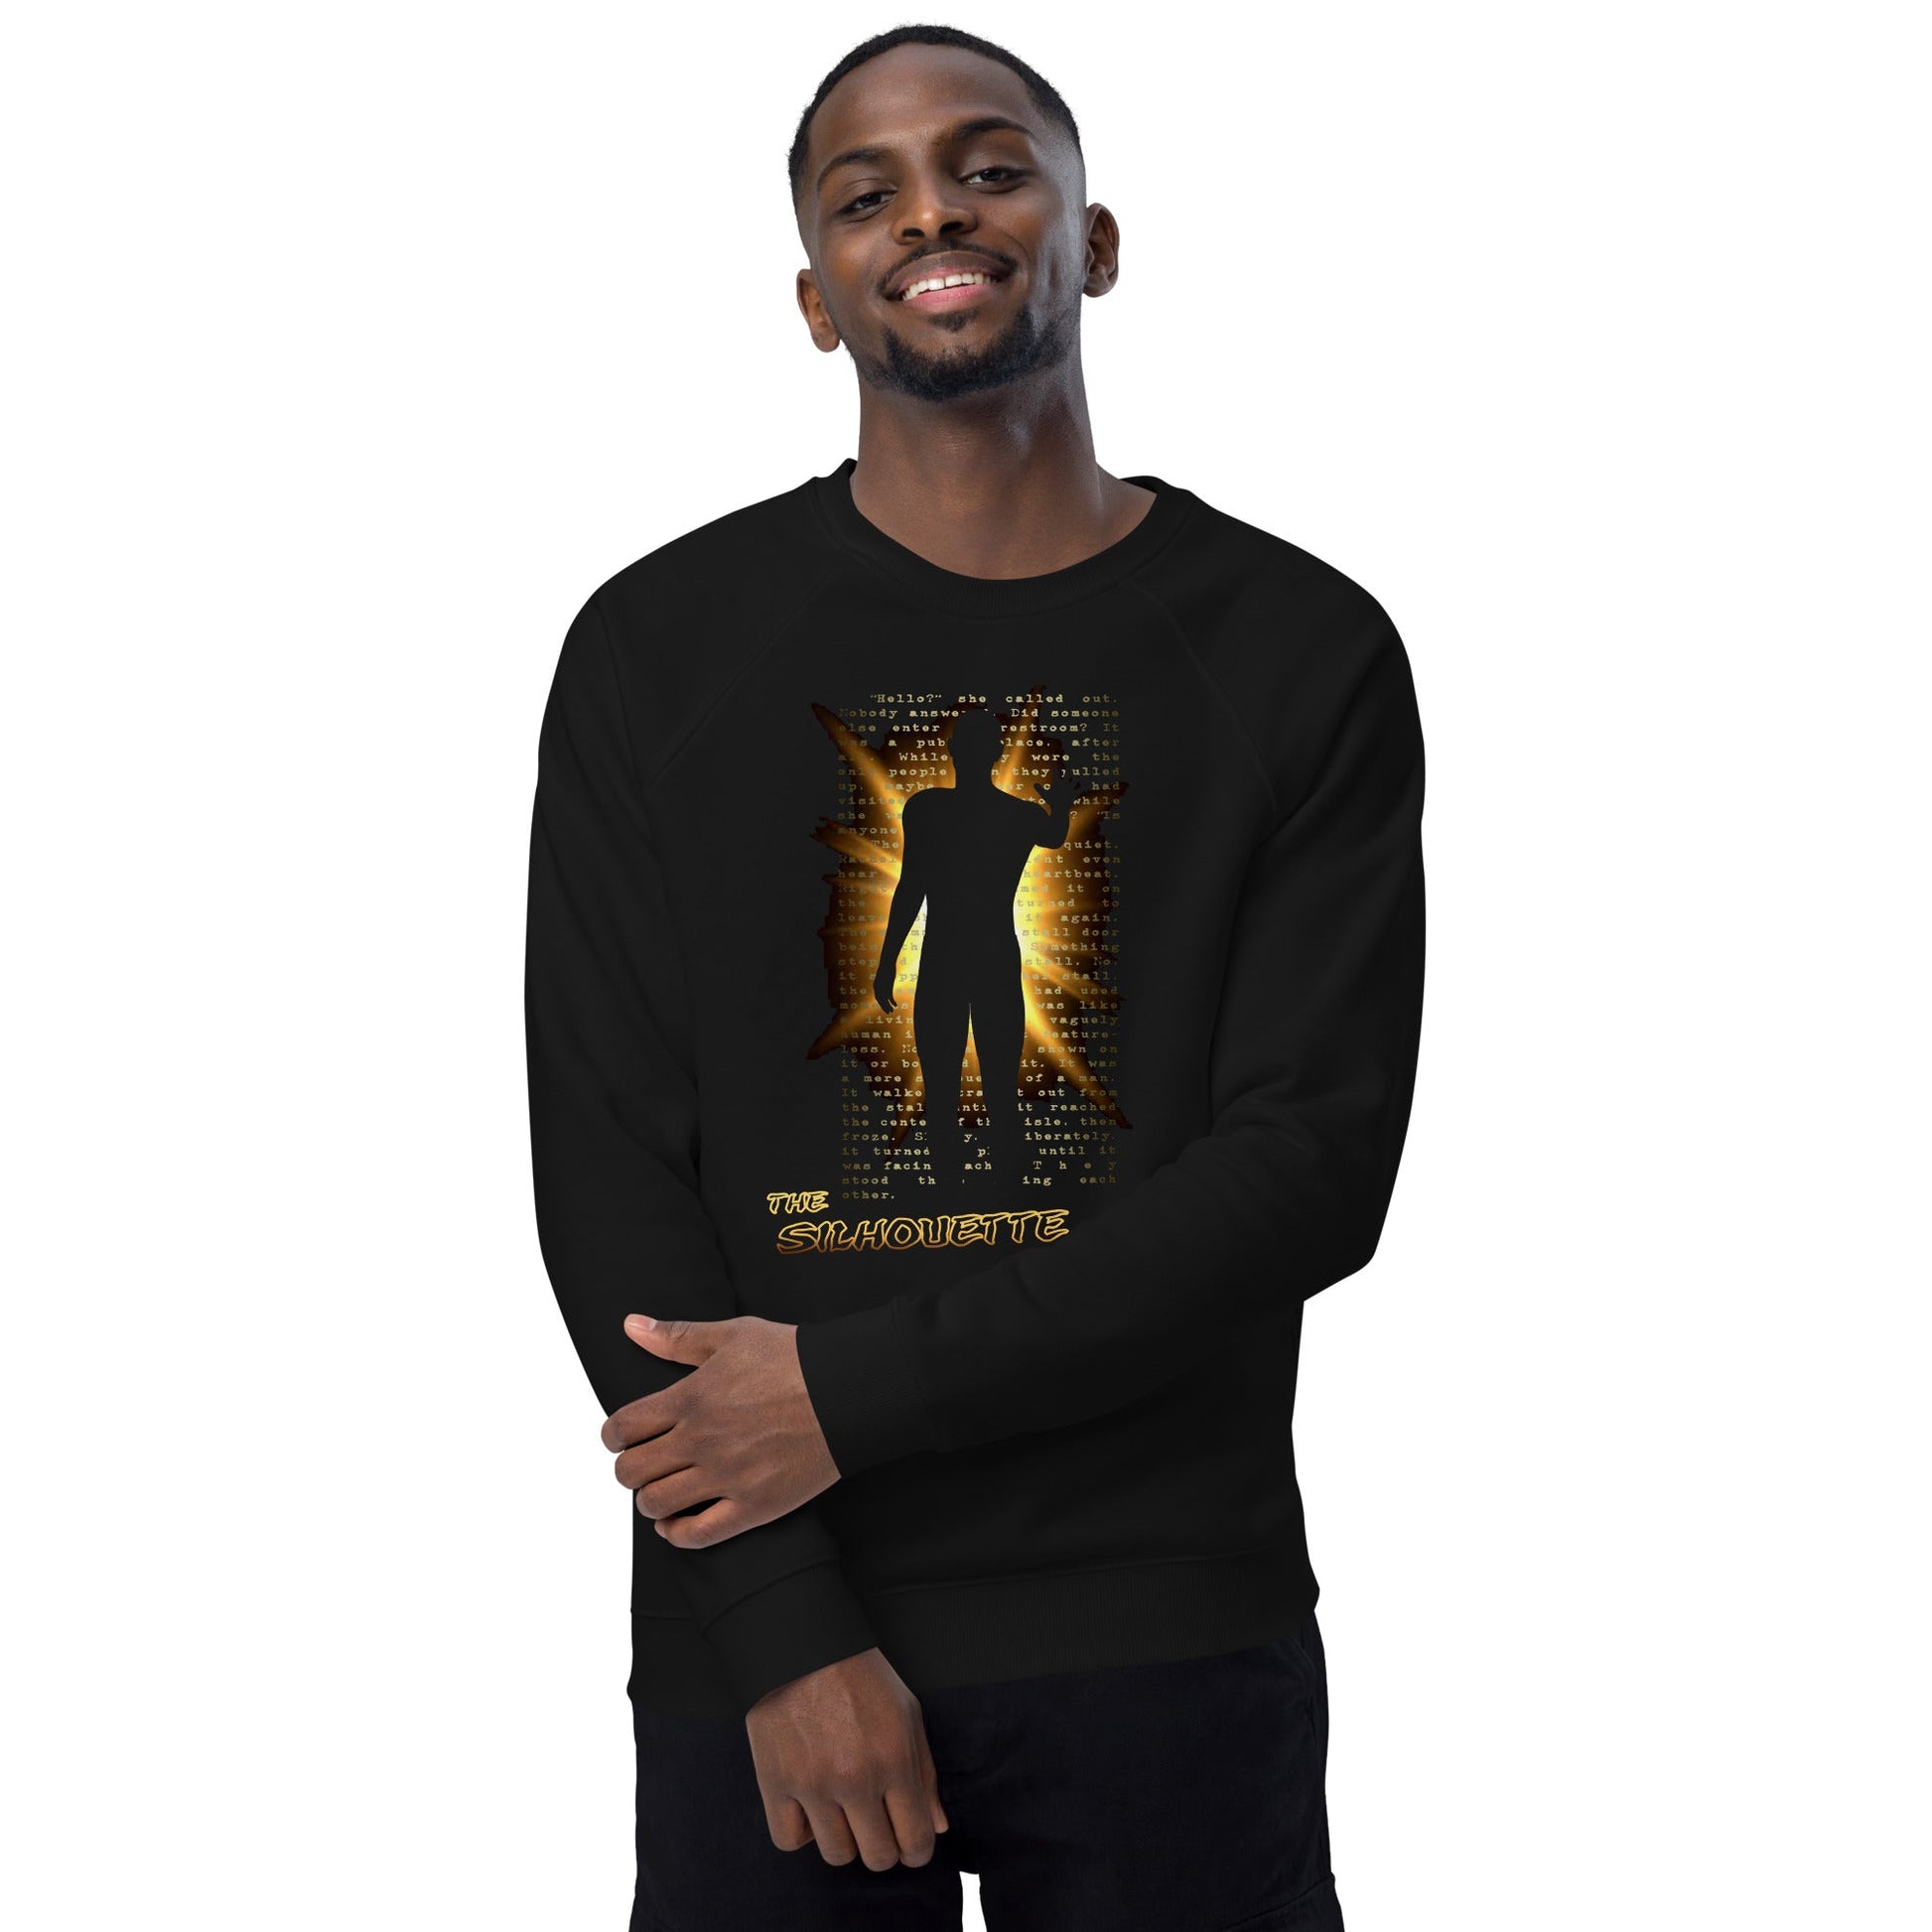 The Silhouette Man | Unisex Organic Raglan Sweatshirt - Embrace the Shadows - Spectral Ink Shop - Sweaters and Hoodies -3019046_14898